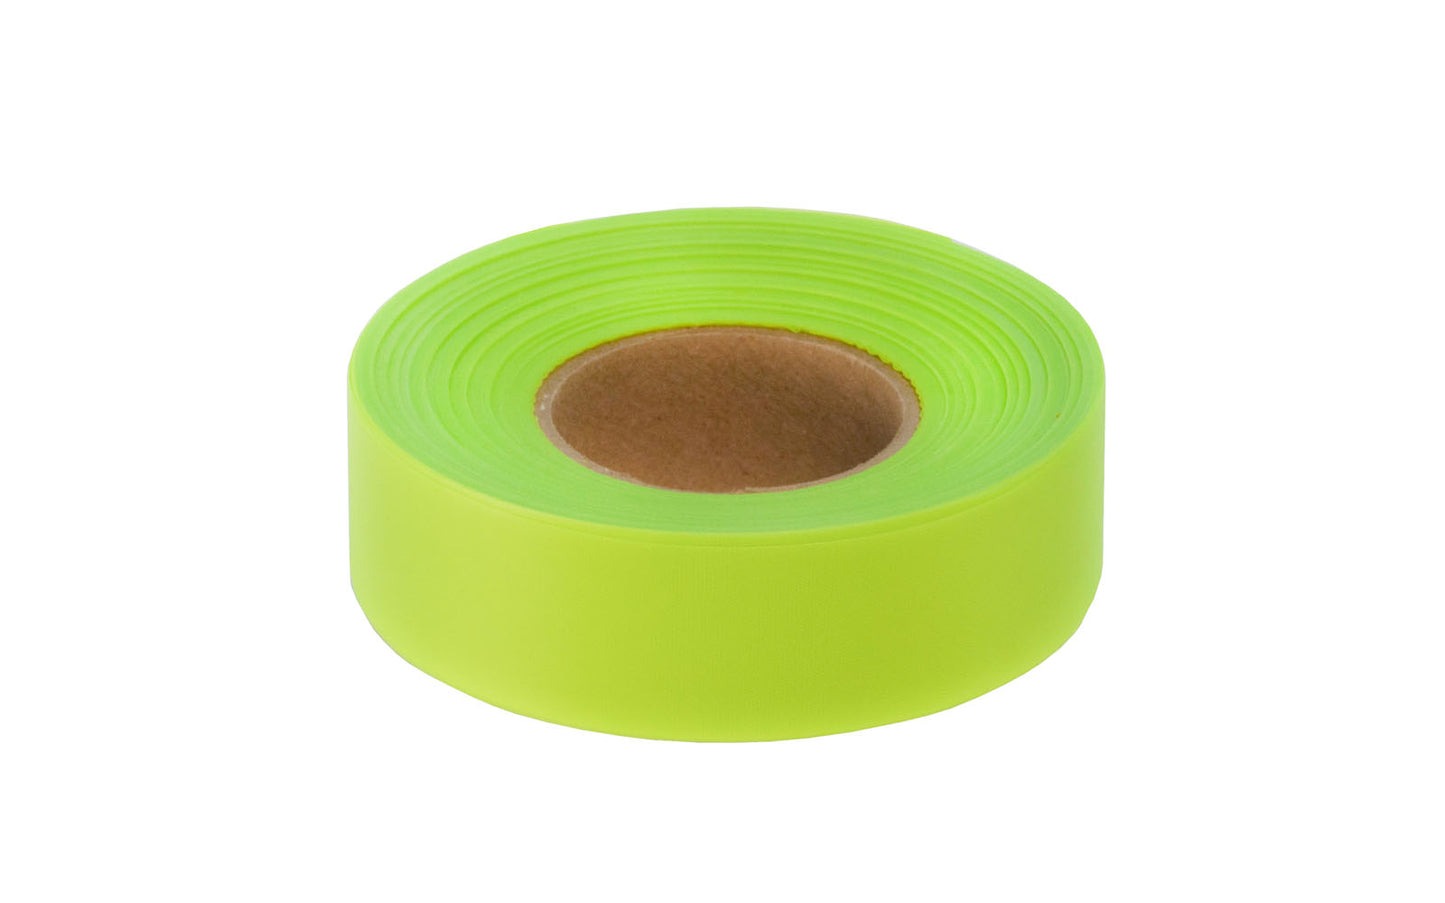 This Swanson Lime Green Flagging Tape 1" x 150' is durable plastic tape that remains pliant in cold weather. Easy to tear & tie off. Tape is ideal for surveying projects, marking trails, & similar tasks, etc. Model RF115LG. 038987643293